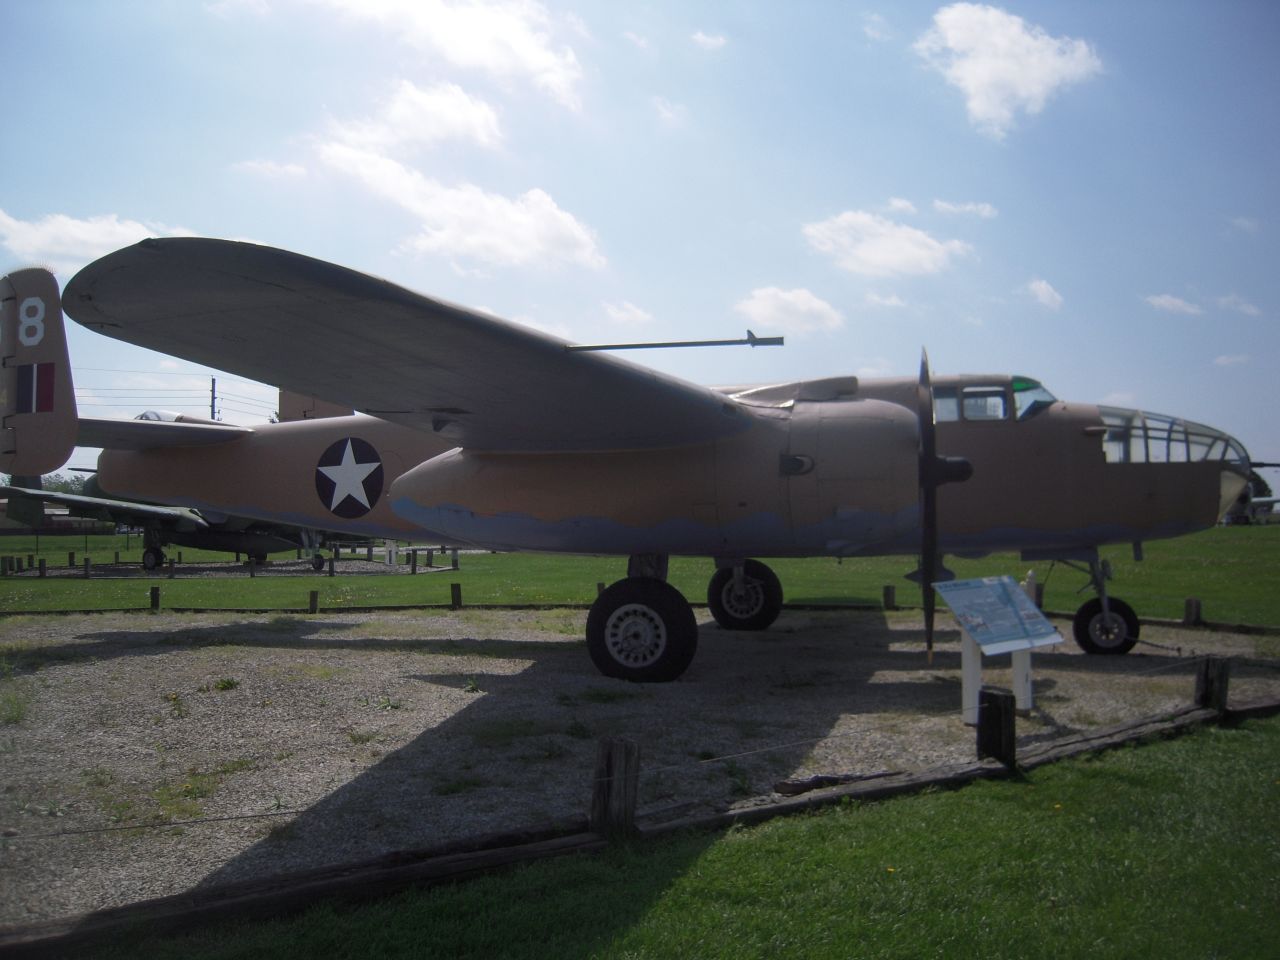 This bomber was one of several B-25 Mitchells flown in the 1970 film "<a href="http://www.imdb.com/title/tt0065528/" target="_blank" target="_blank">Catch-22.</a>" Named "Passionate Paulette," it's one of 139 surviving B-25s, 48 of which are still flying, <a href="http://www.grissomairmuseum.com/?page_id=283" target="_blank" target="_blank">according to Grissom Air Museum.</a>